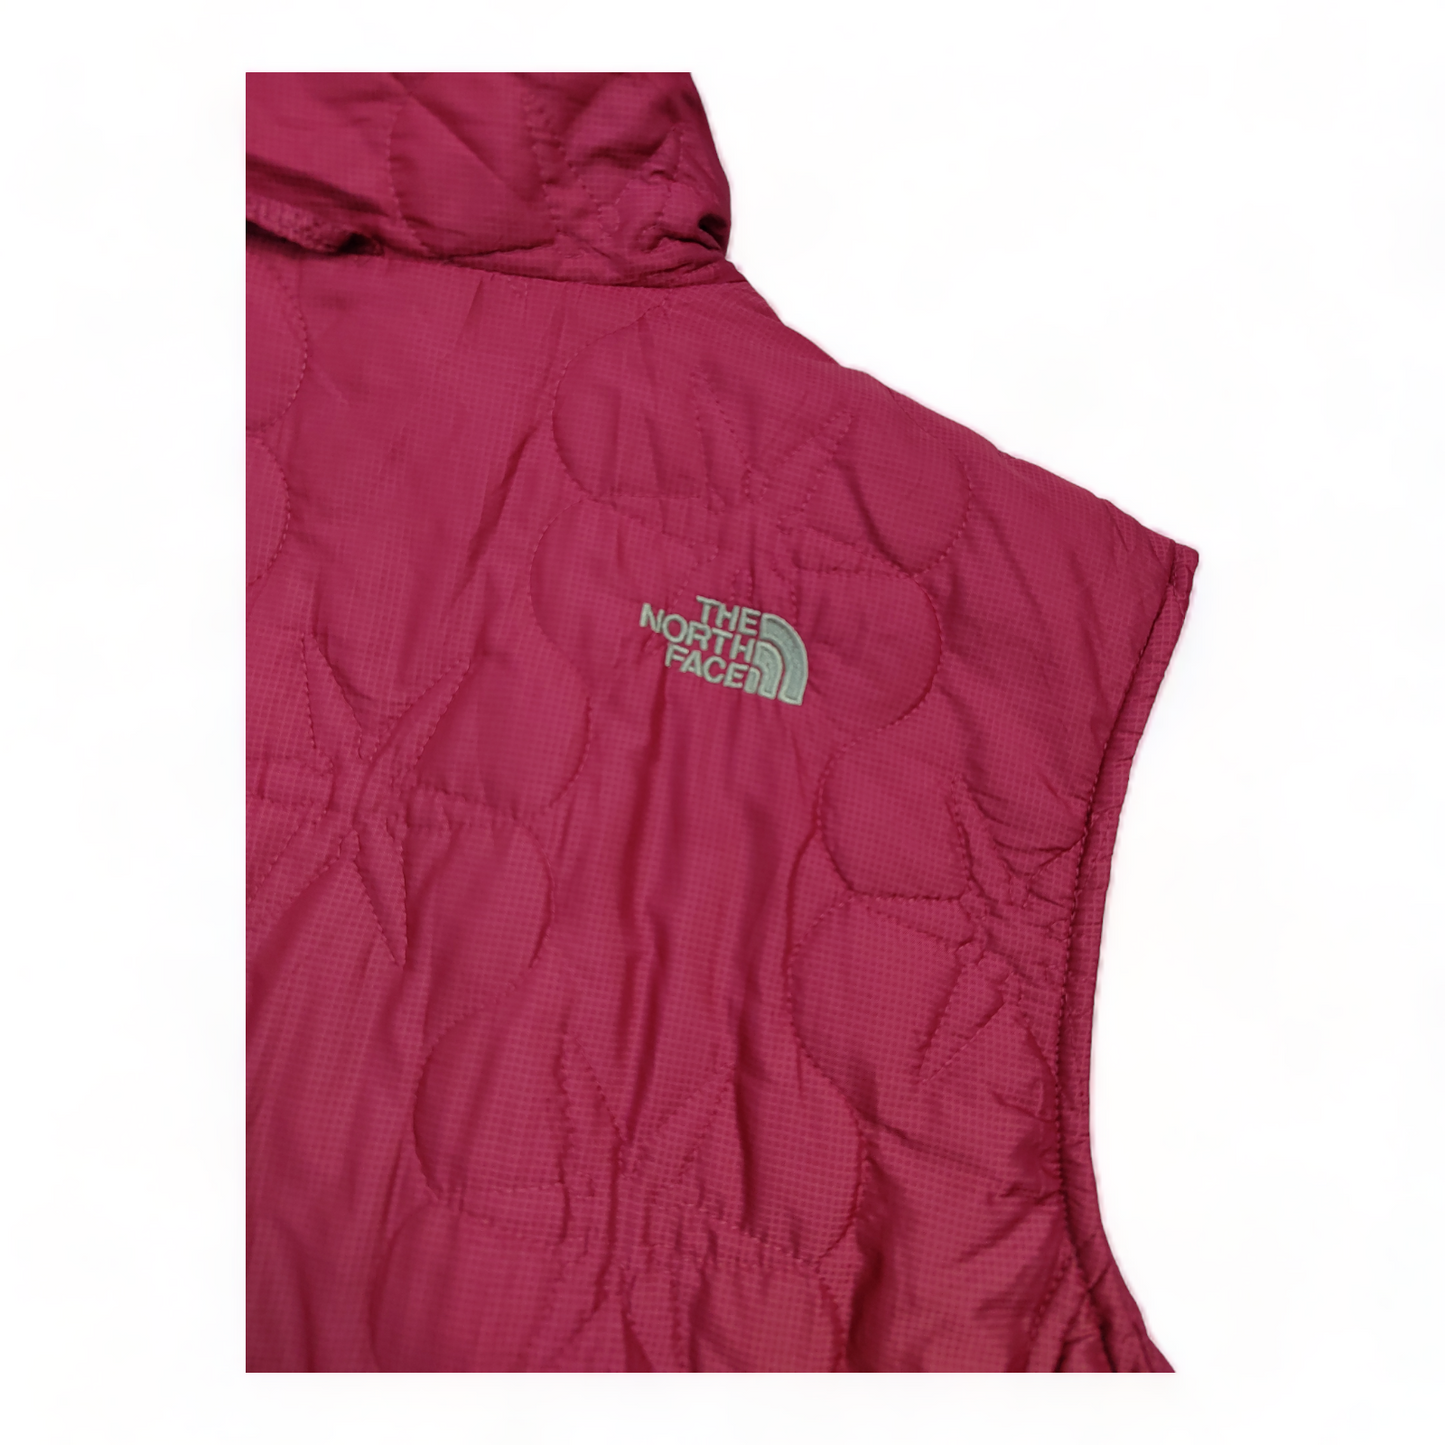 The North Face Bodywarmer Women’s Large Pink Zip Up Thermal